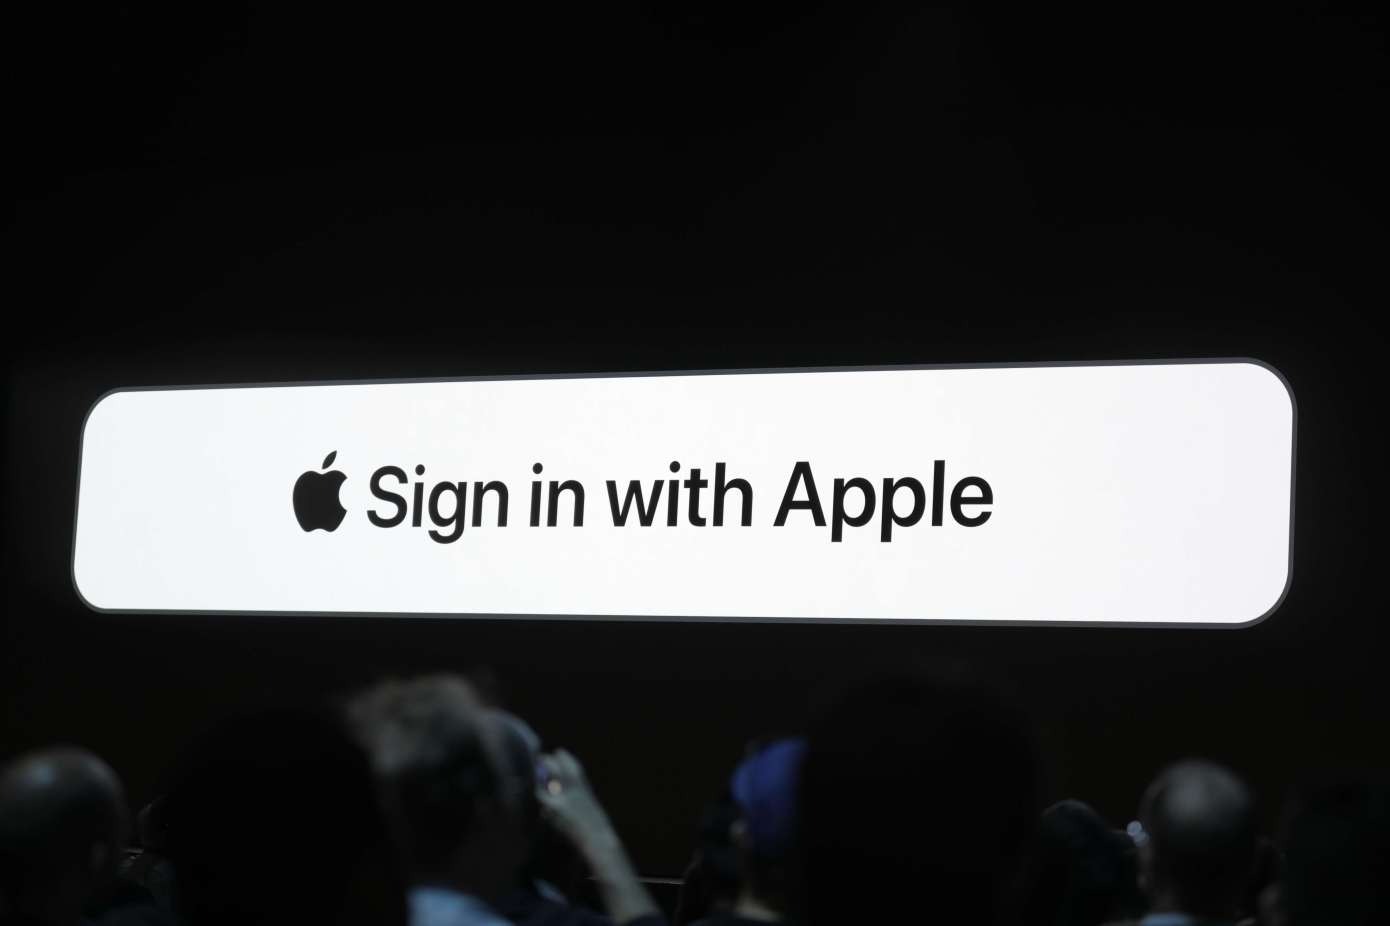 sign in with apple 1